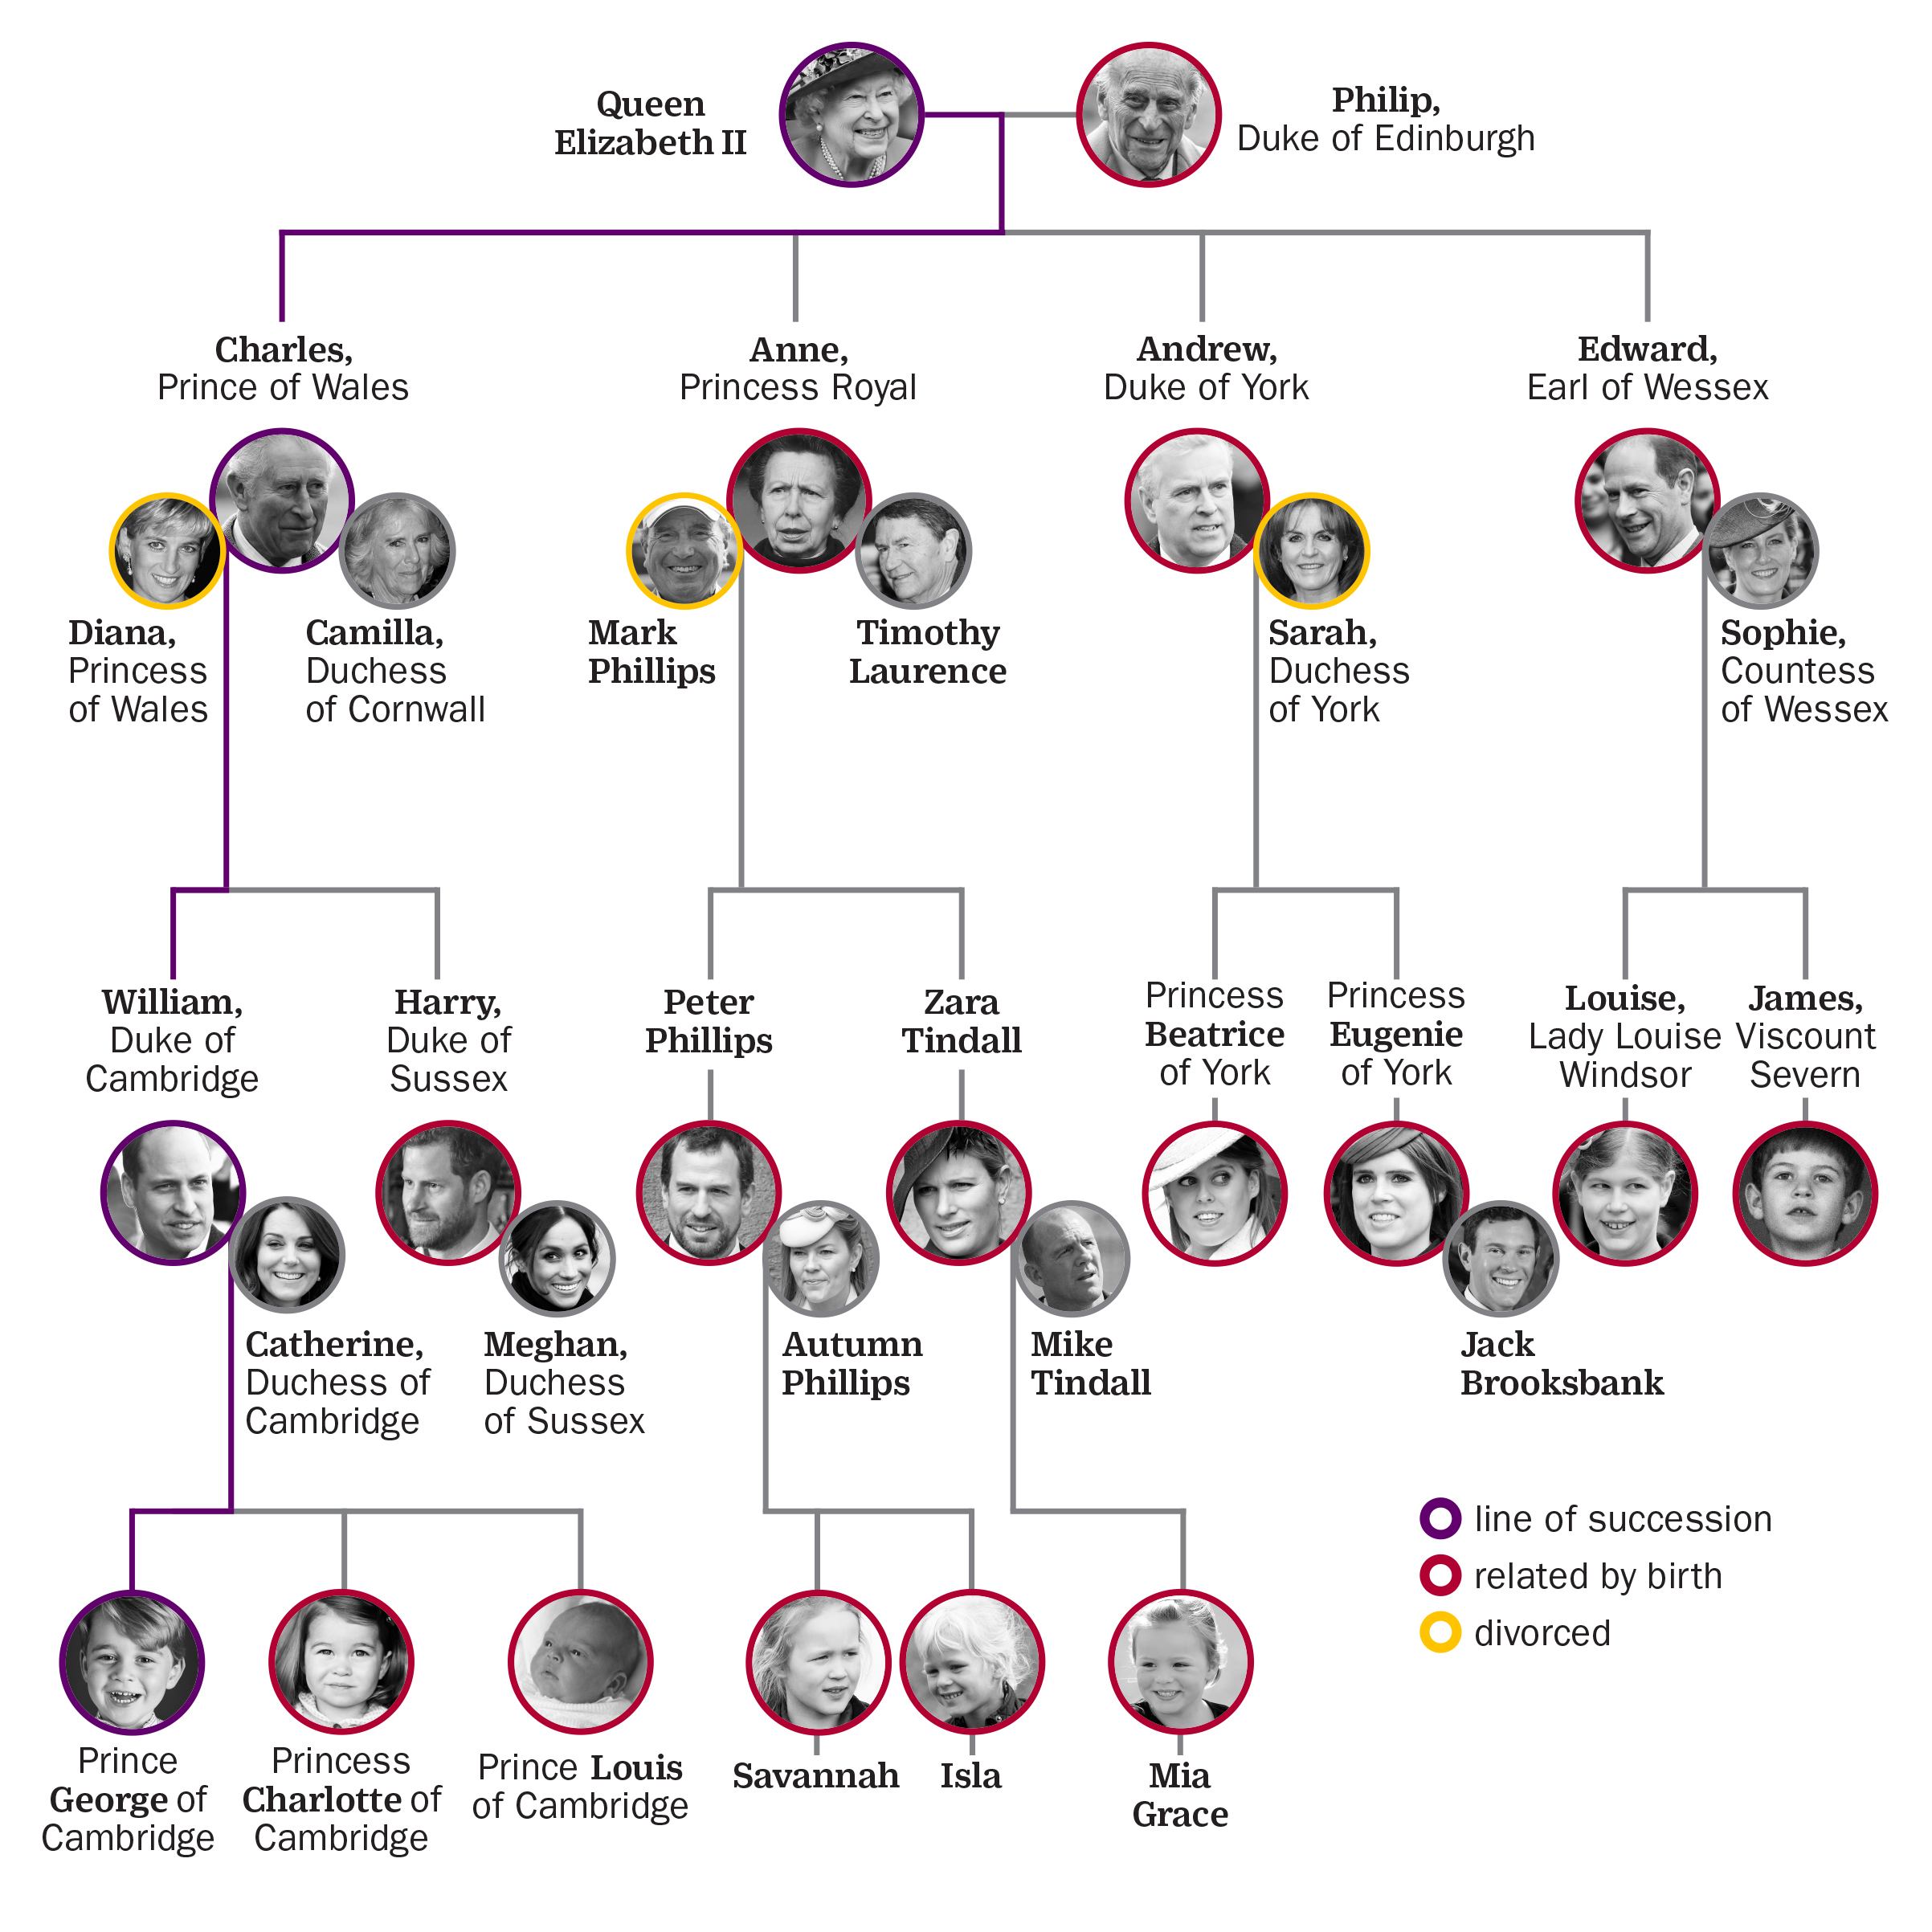 The Royal Family tree is undergoing some changes